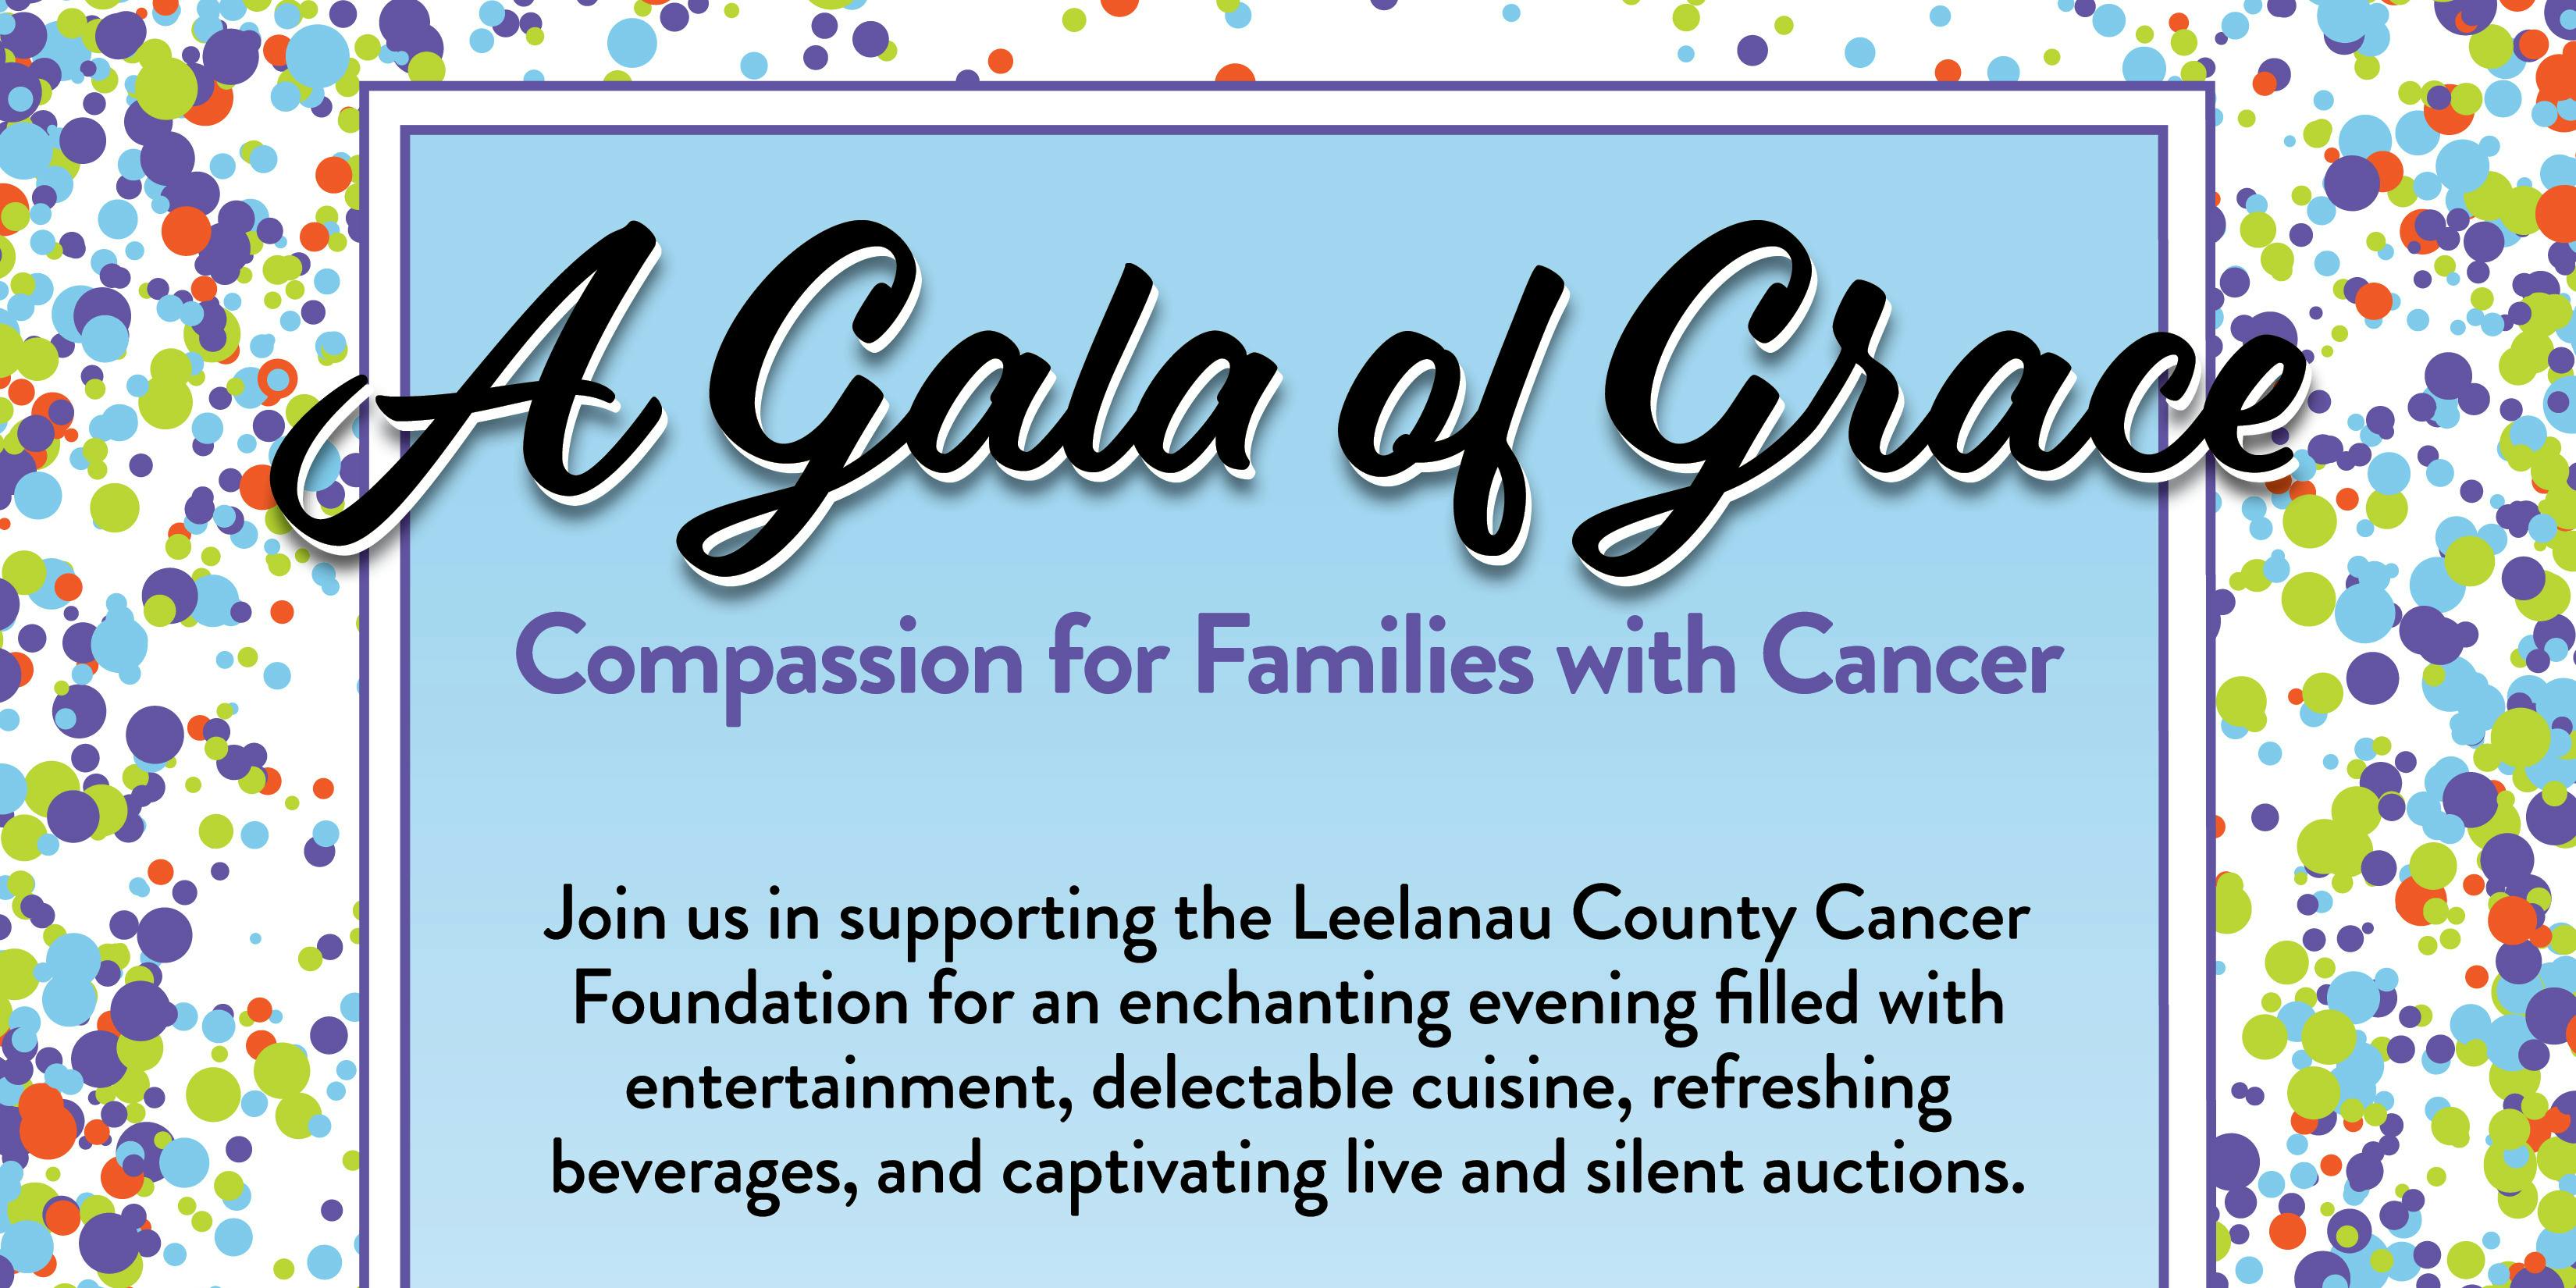 A Gala of Grace, Compassion for Families with Cancer